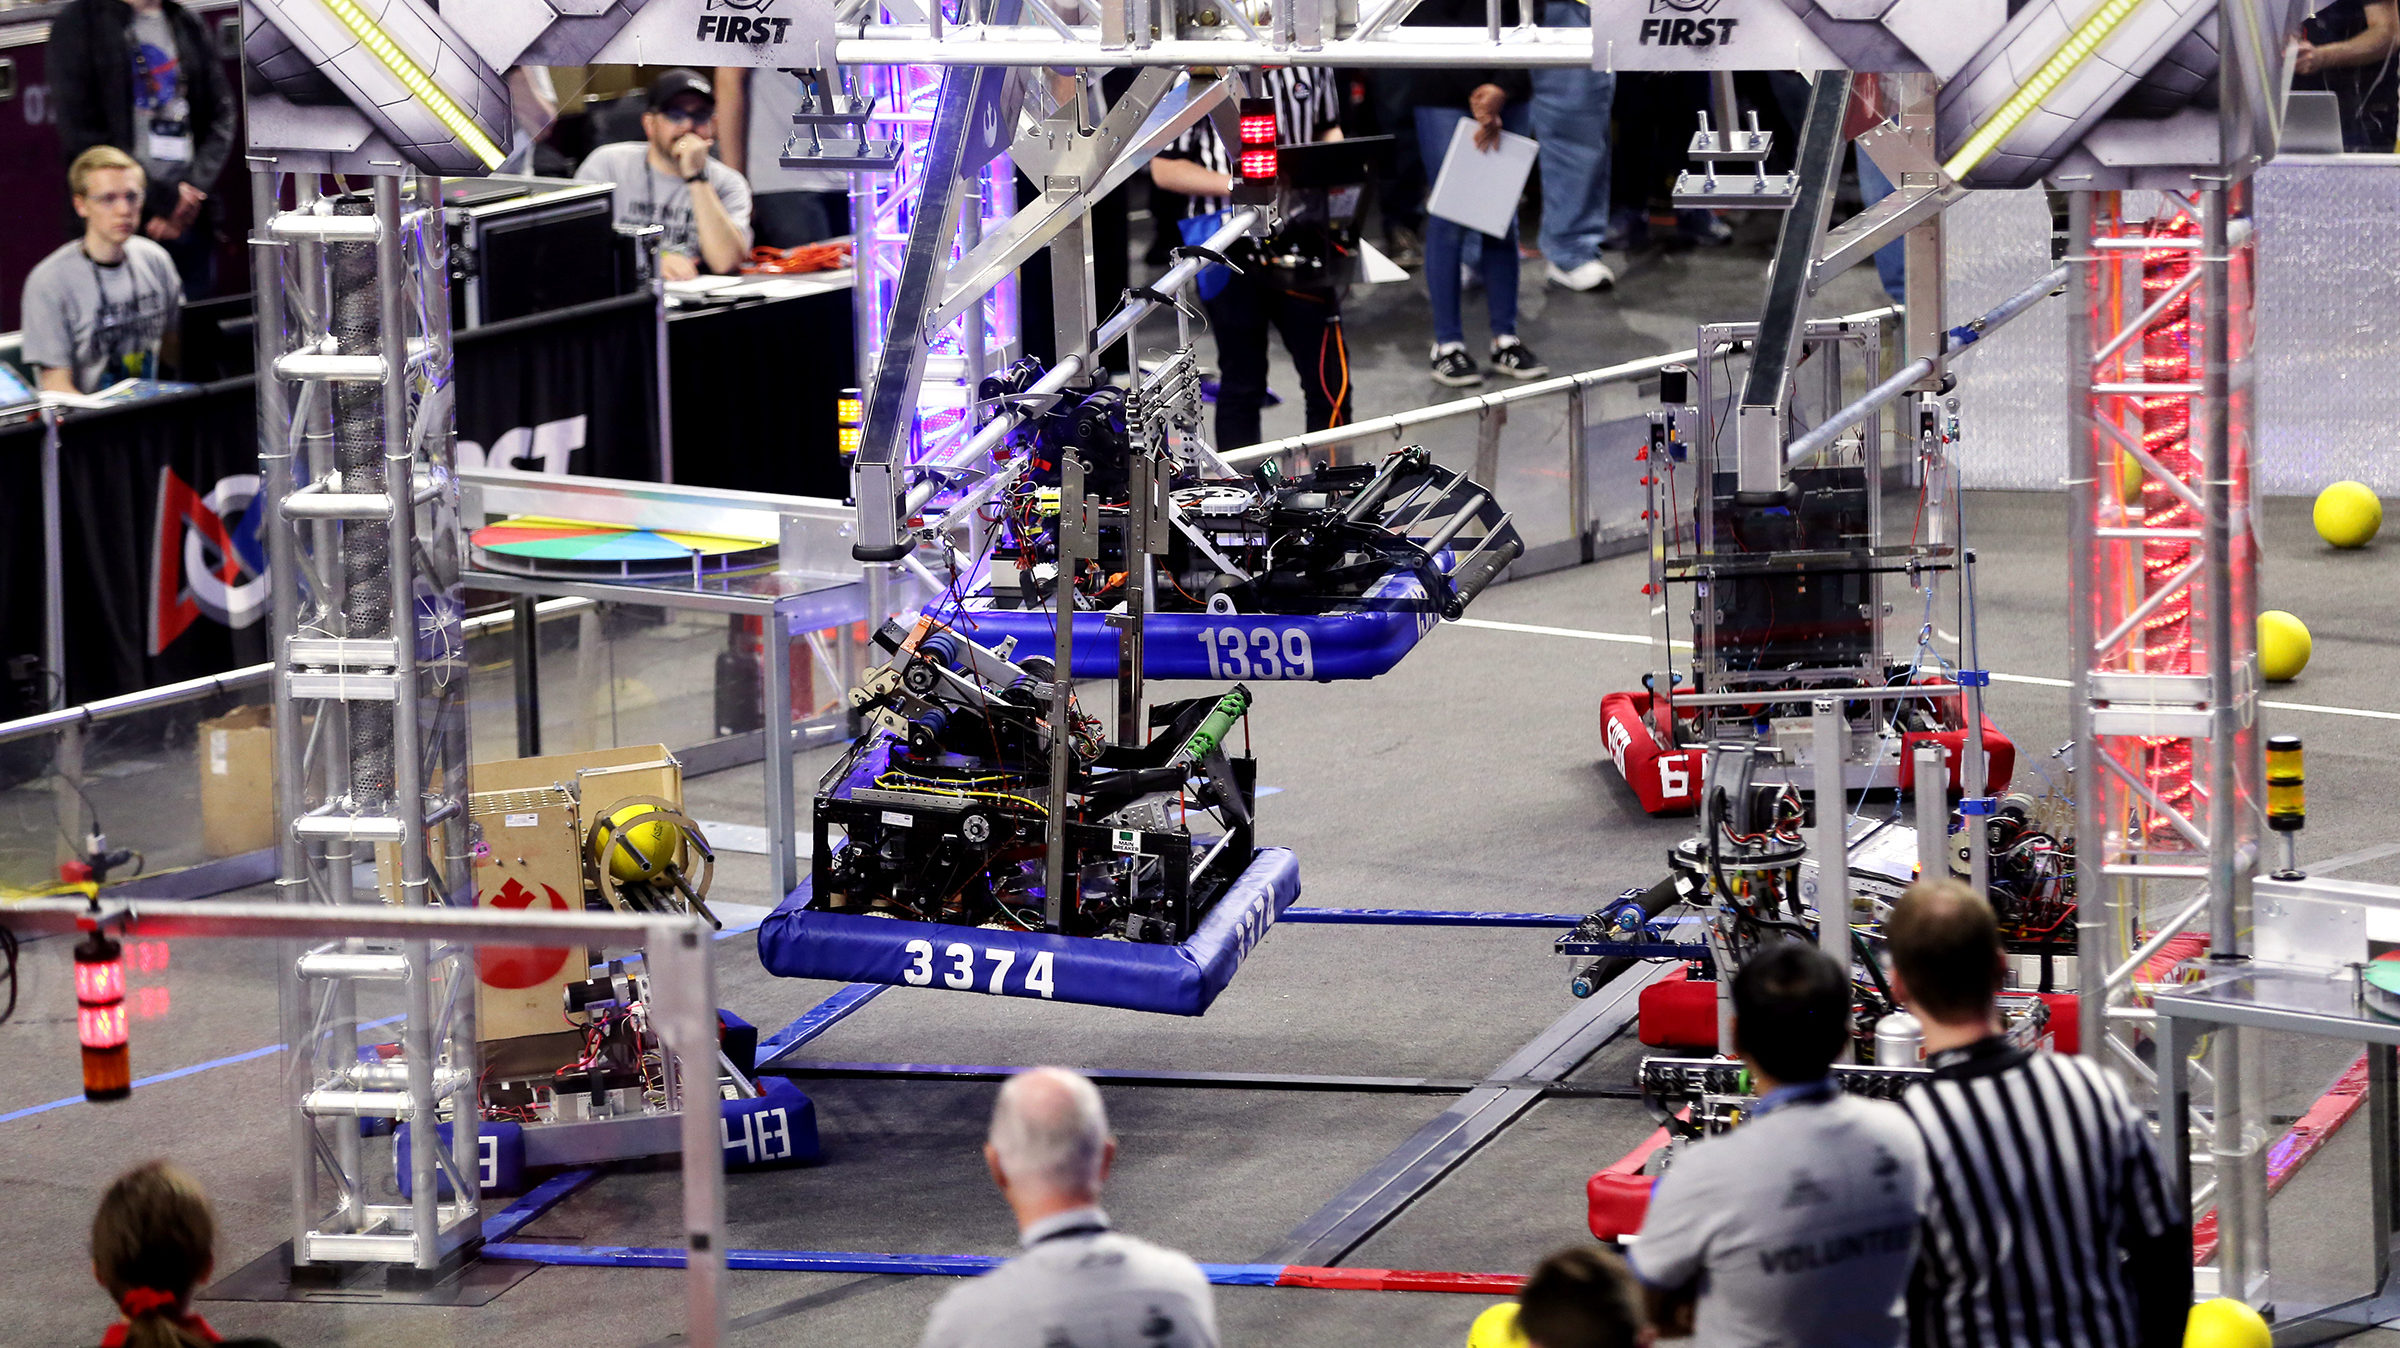 Photo of the Utah FIRST robotics competition....